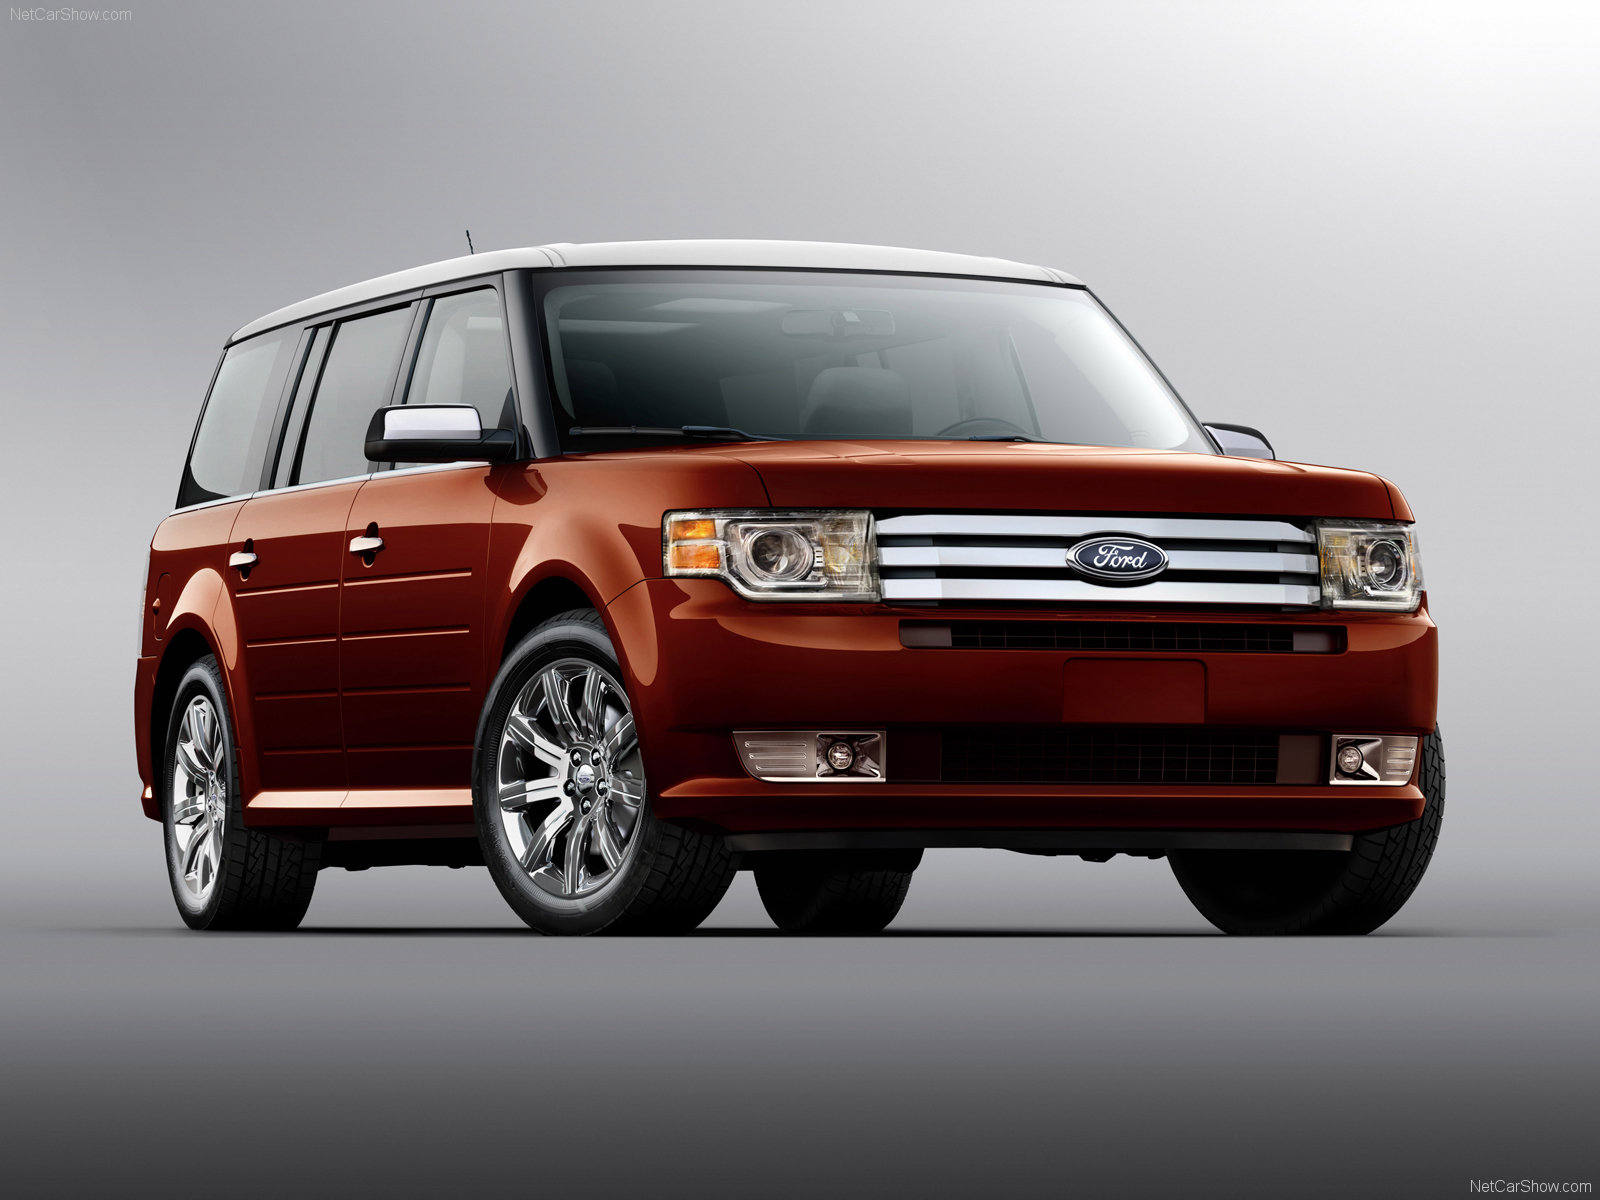 Temple Hills Ford Flex For Sale | Used Make Ford Flex ...